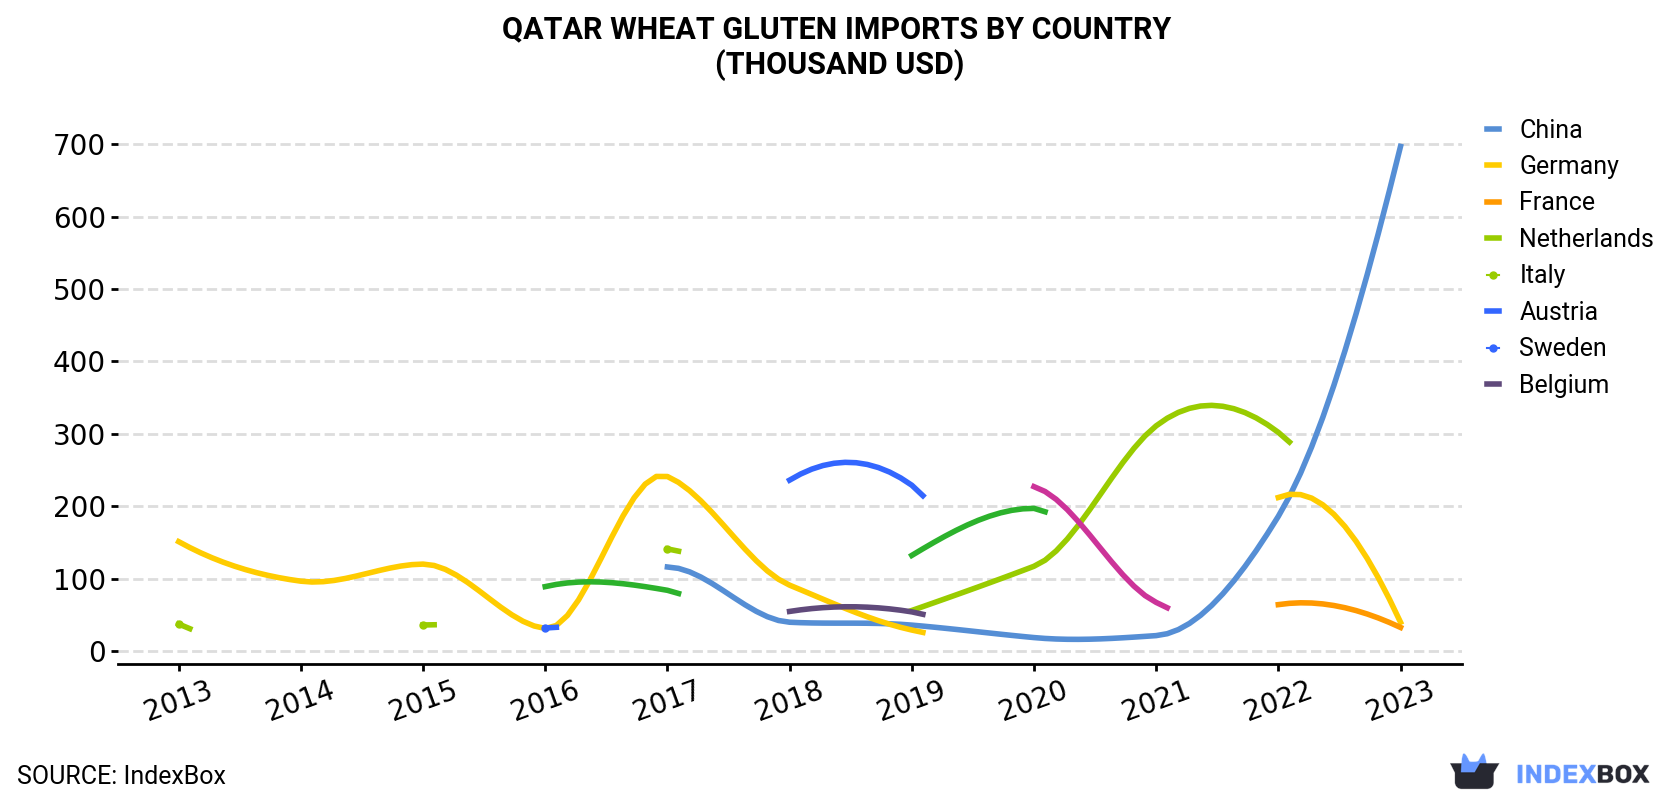 Qatar Wheat Gluten Imports By Country (Thousand USD)